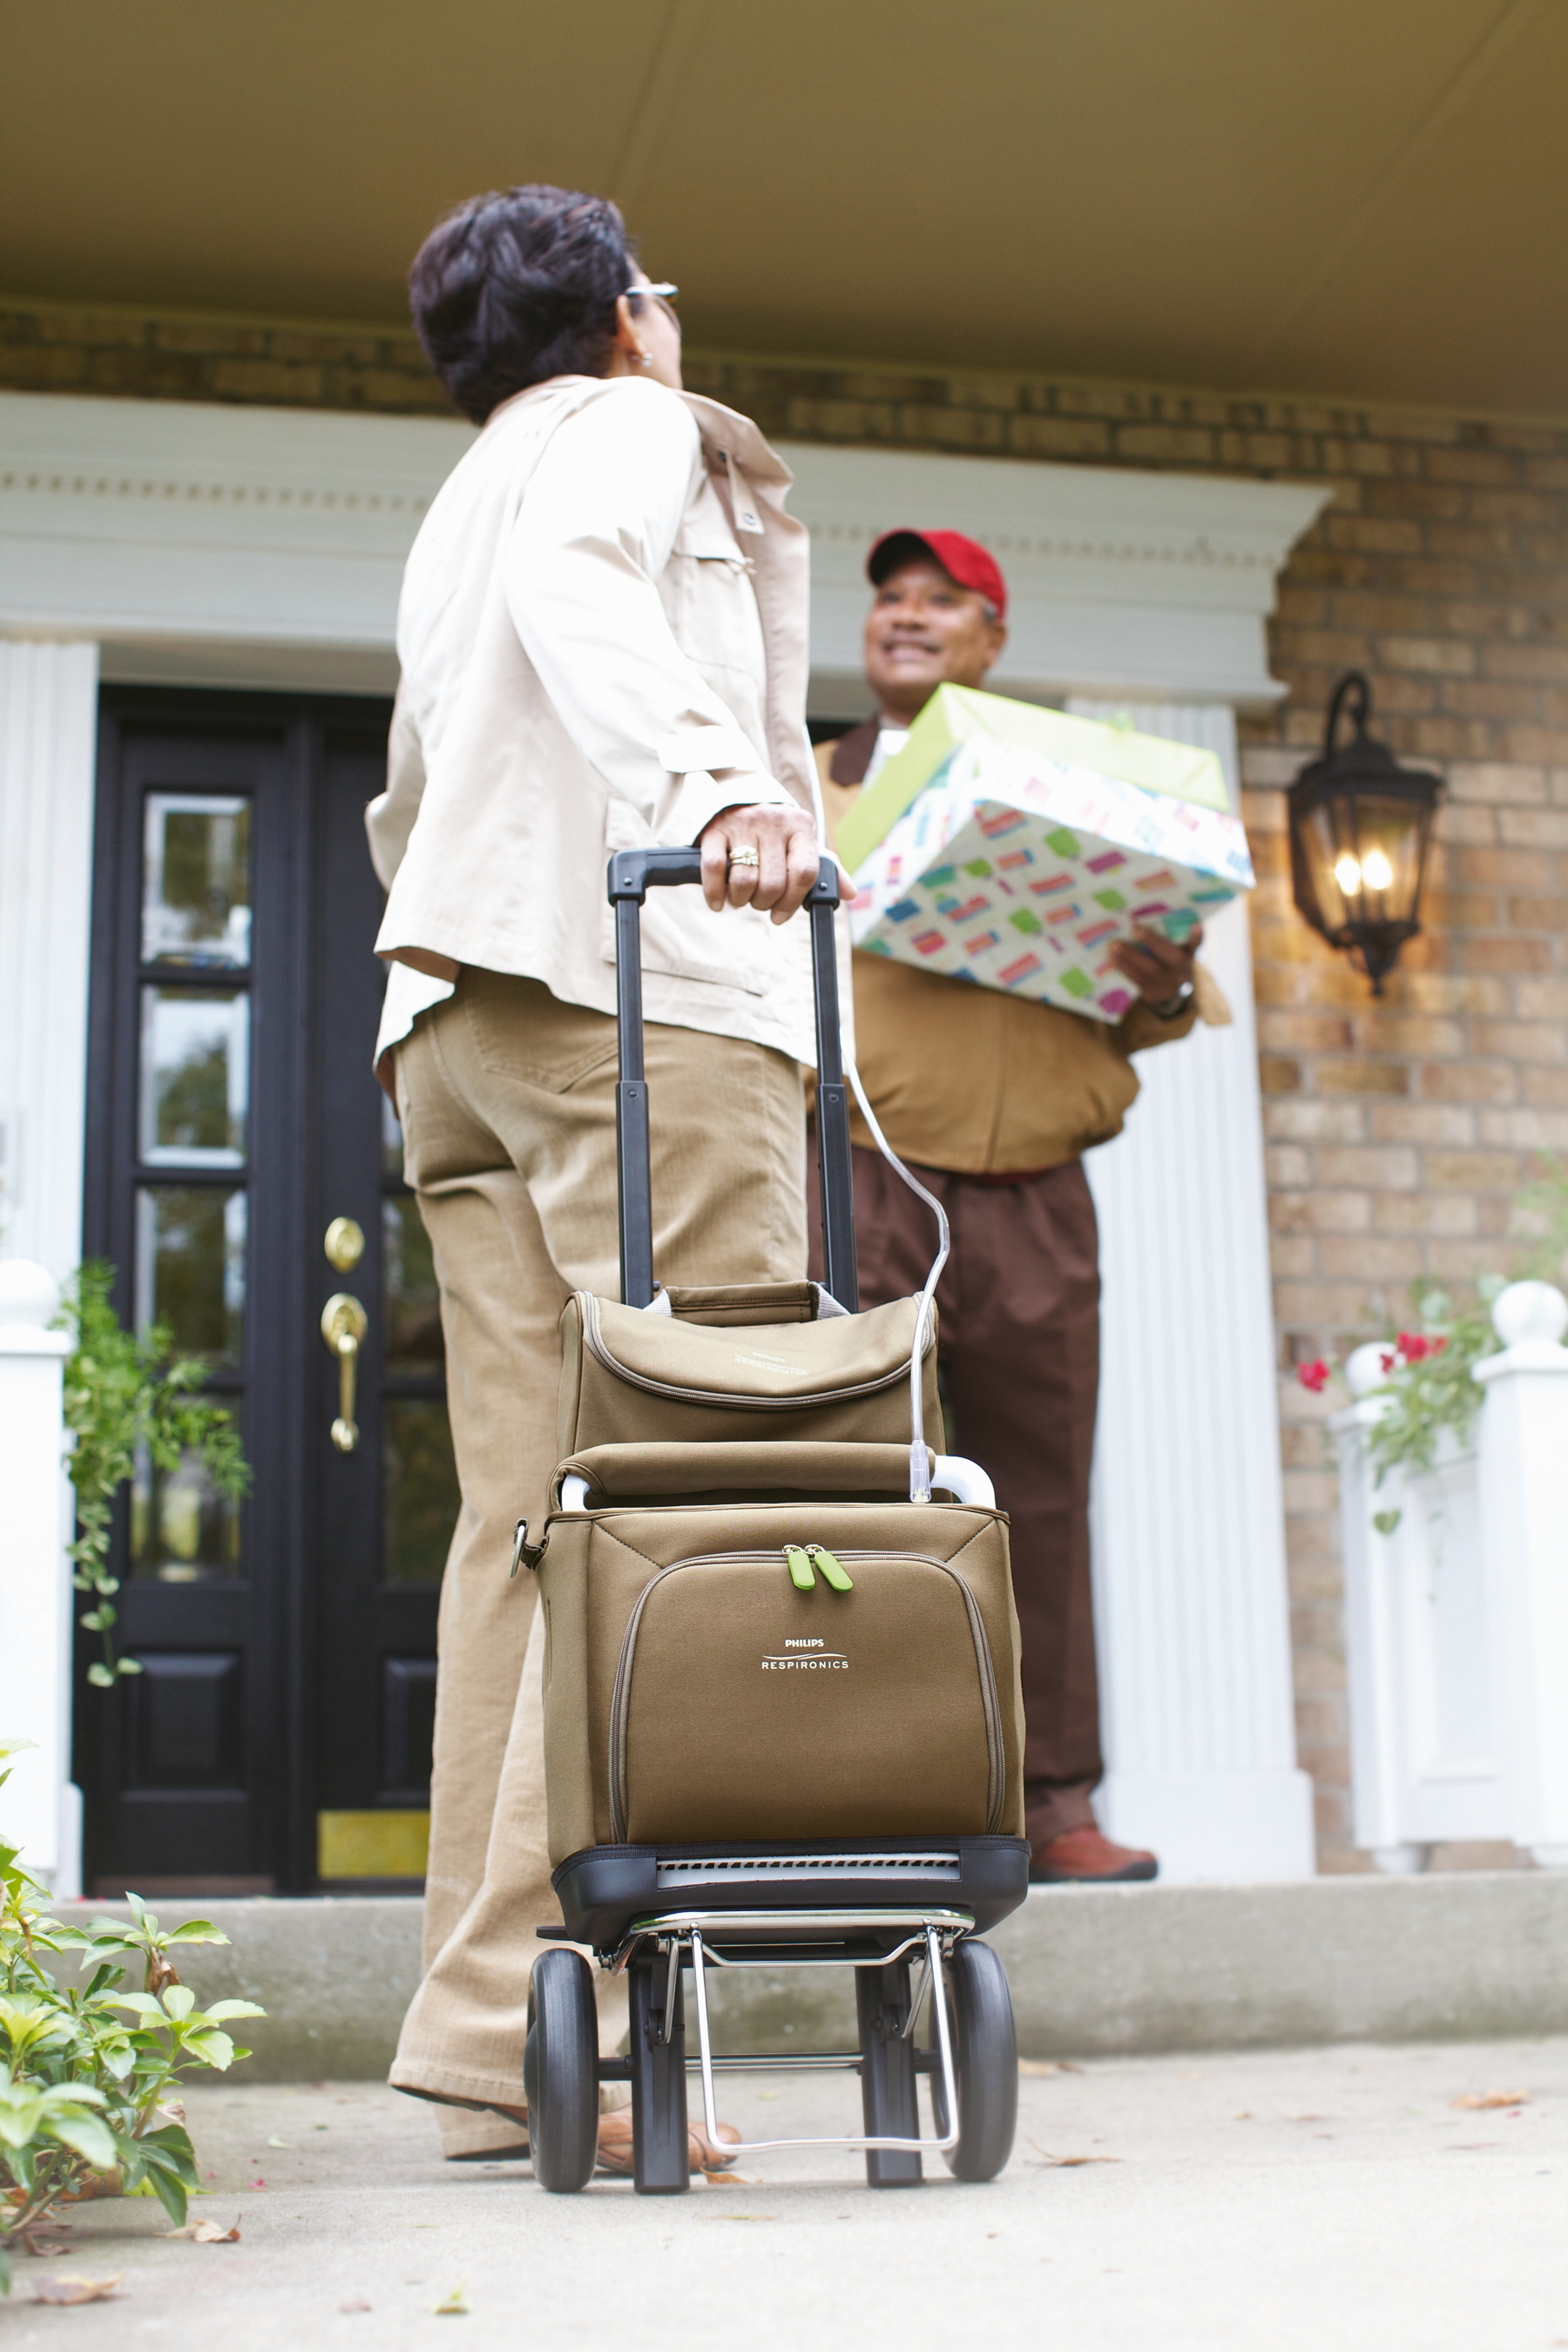 Photo of the SimplyGo Portable Oxygen Concentrator in the bag and cart with a person using it.